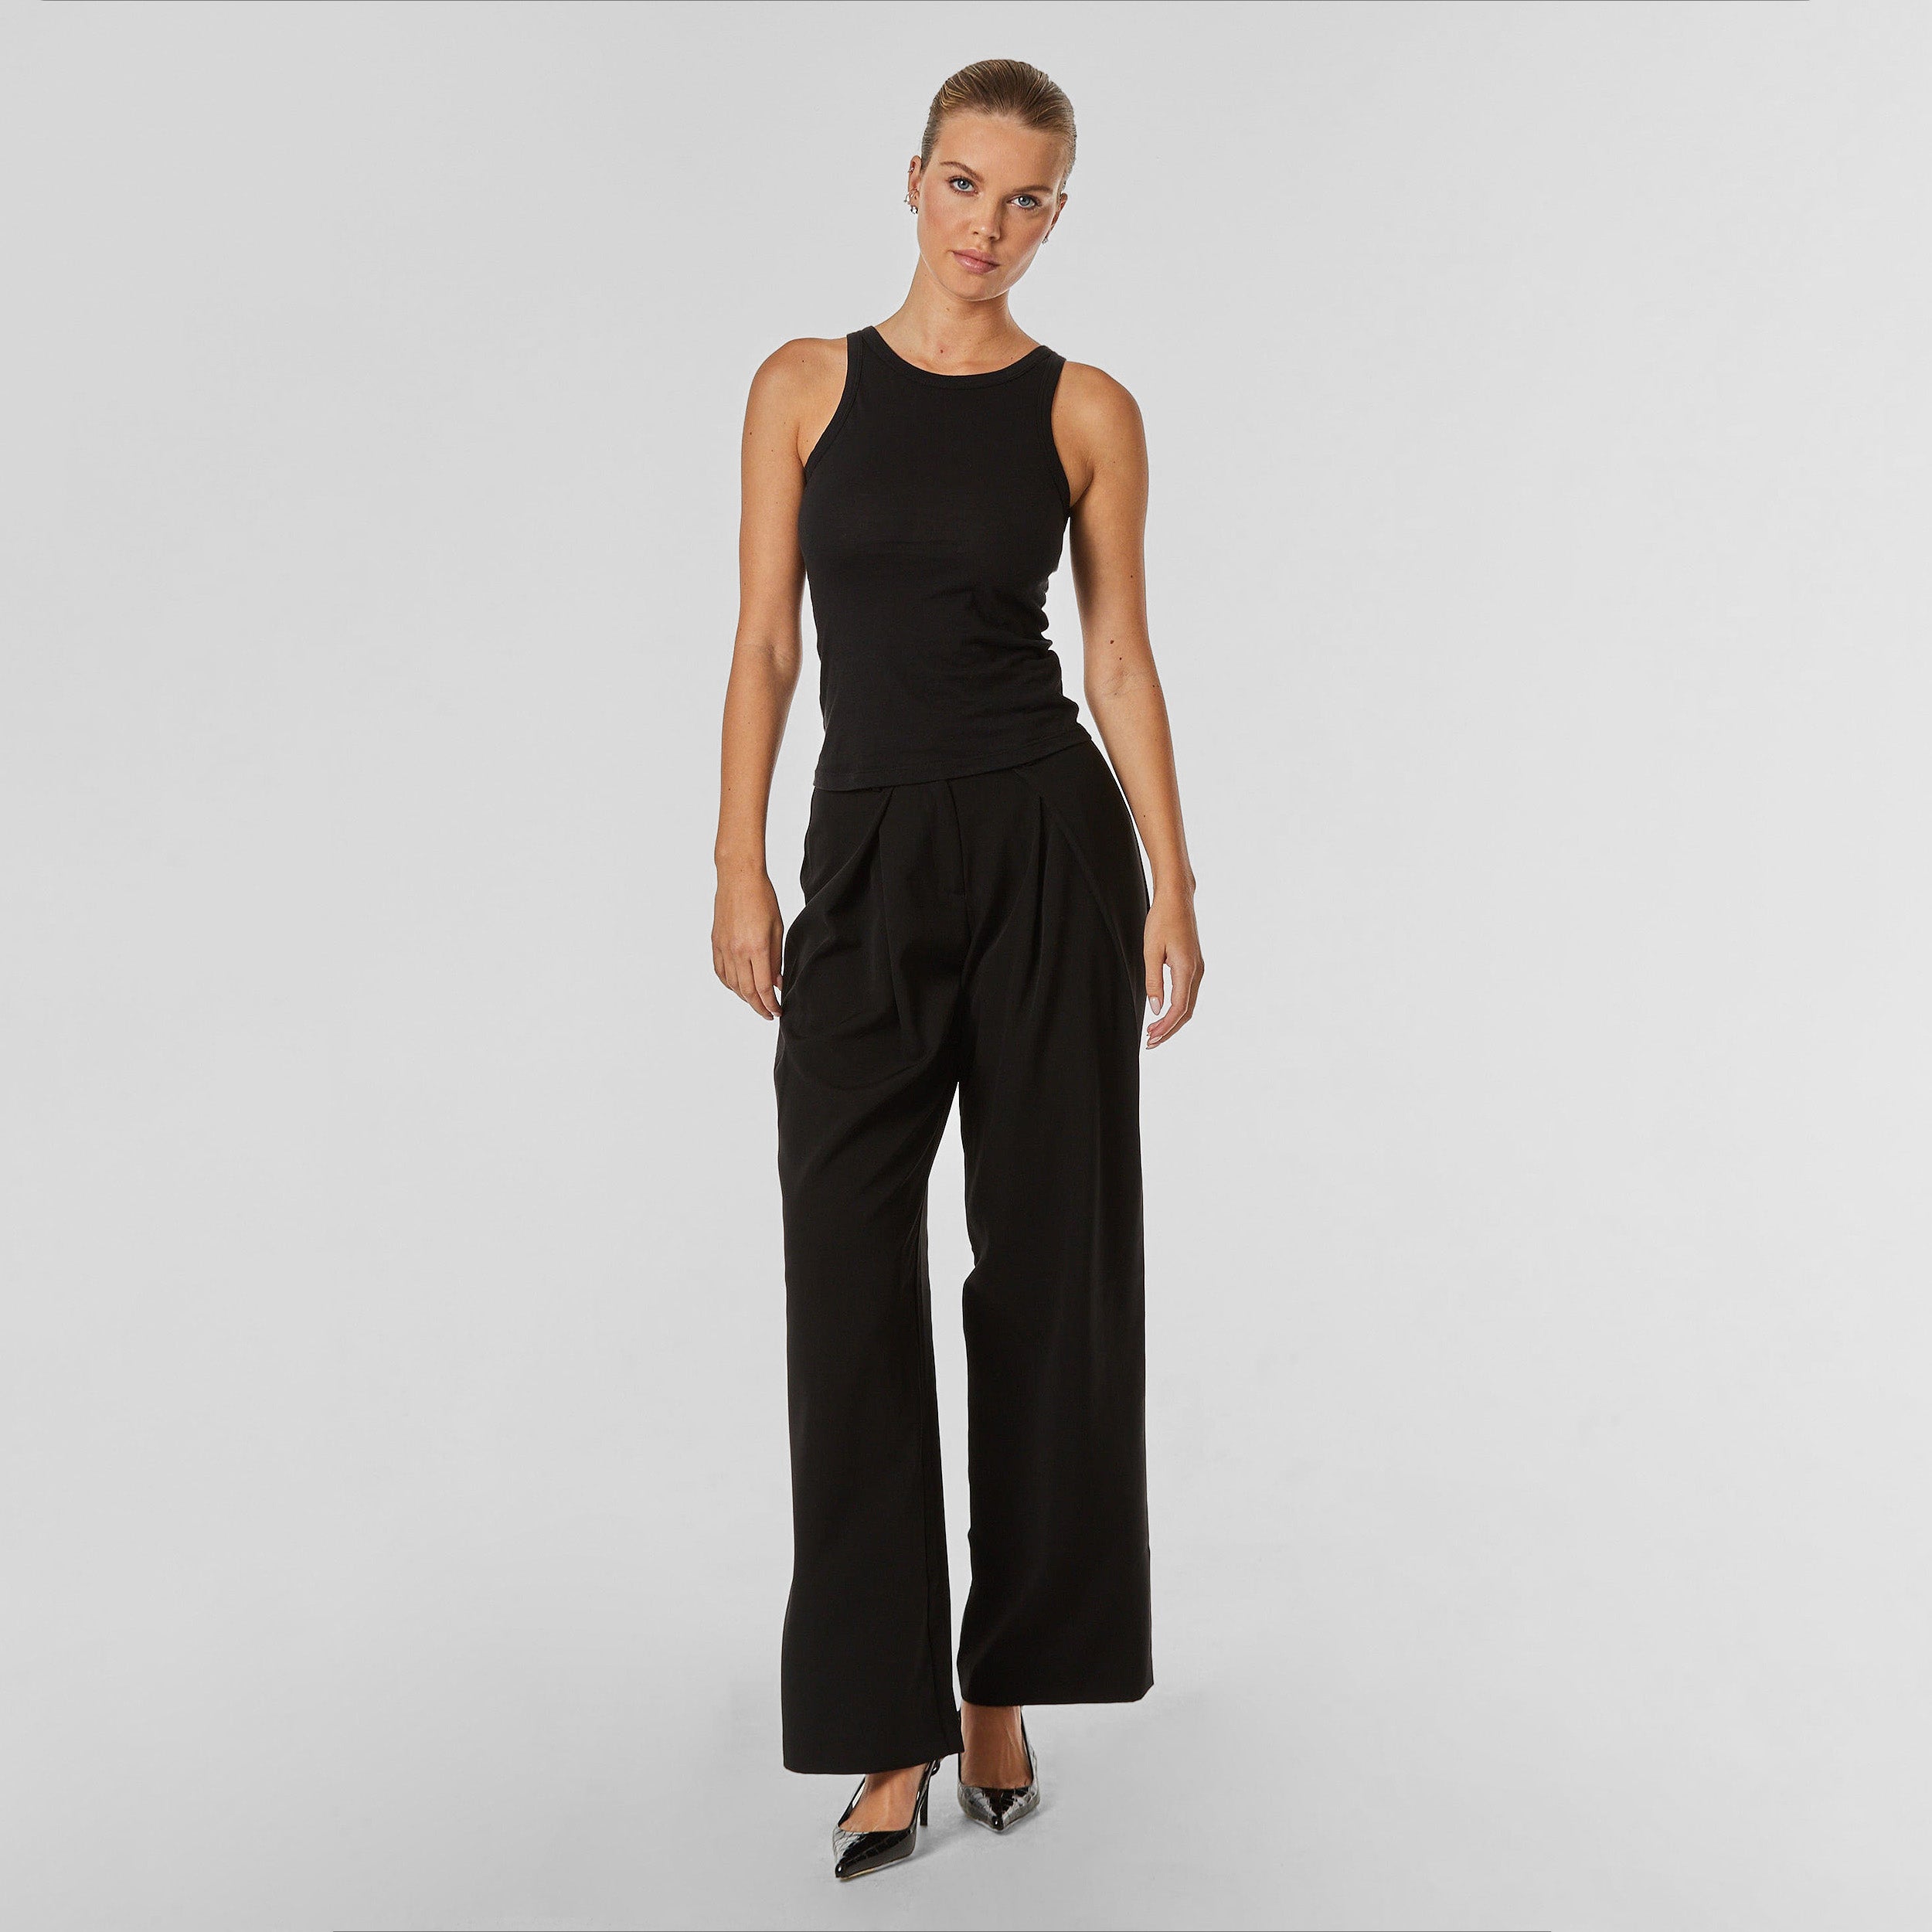 Full body front view of woman wearing pleated black trousers with stretch fabric